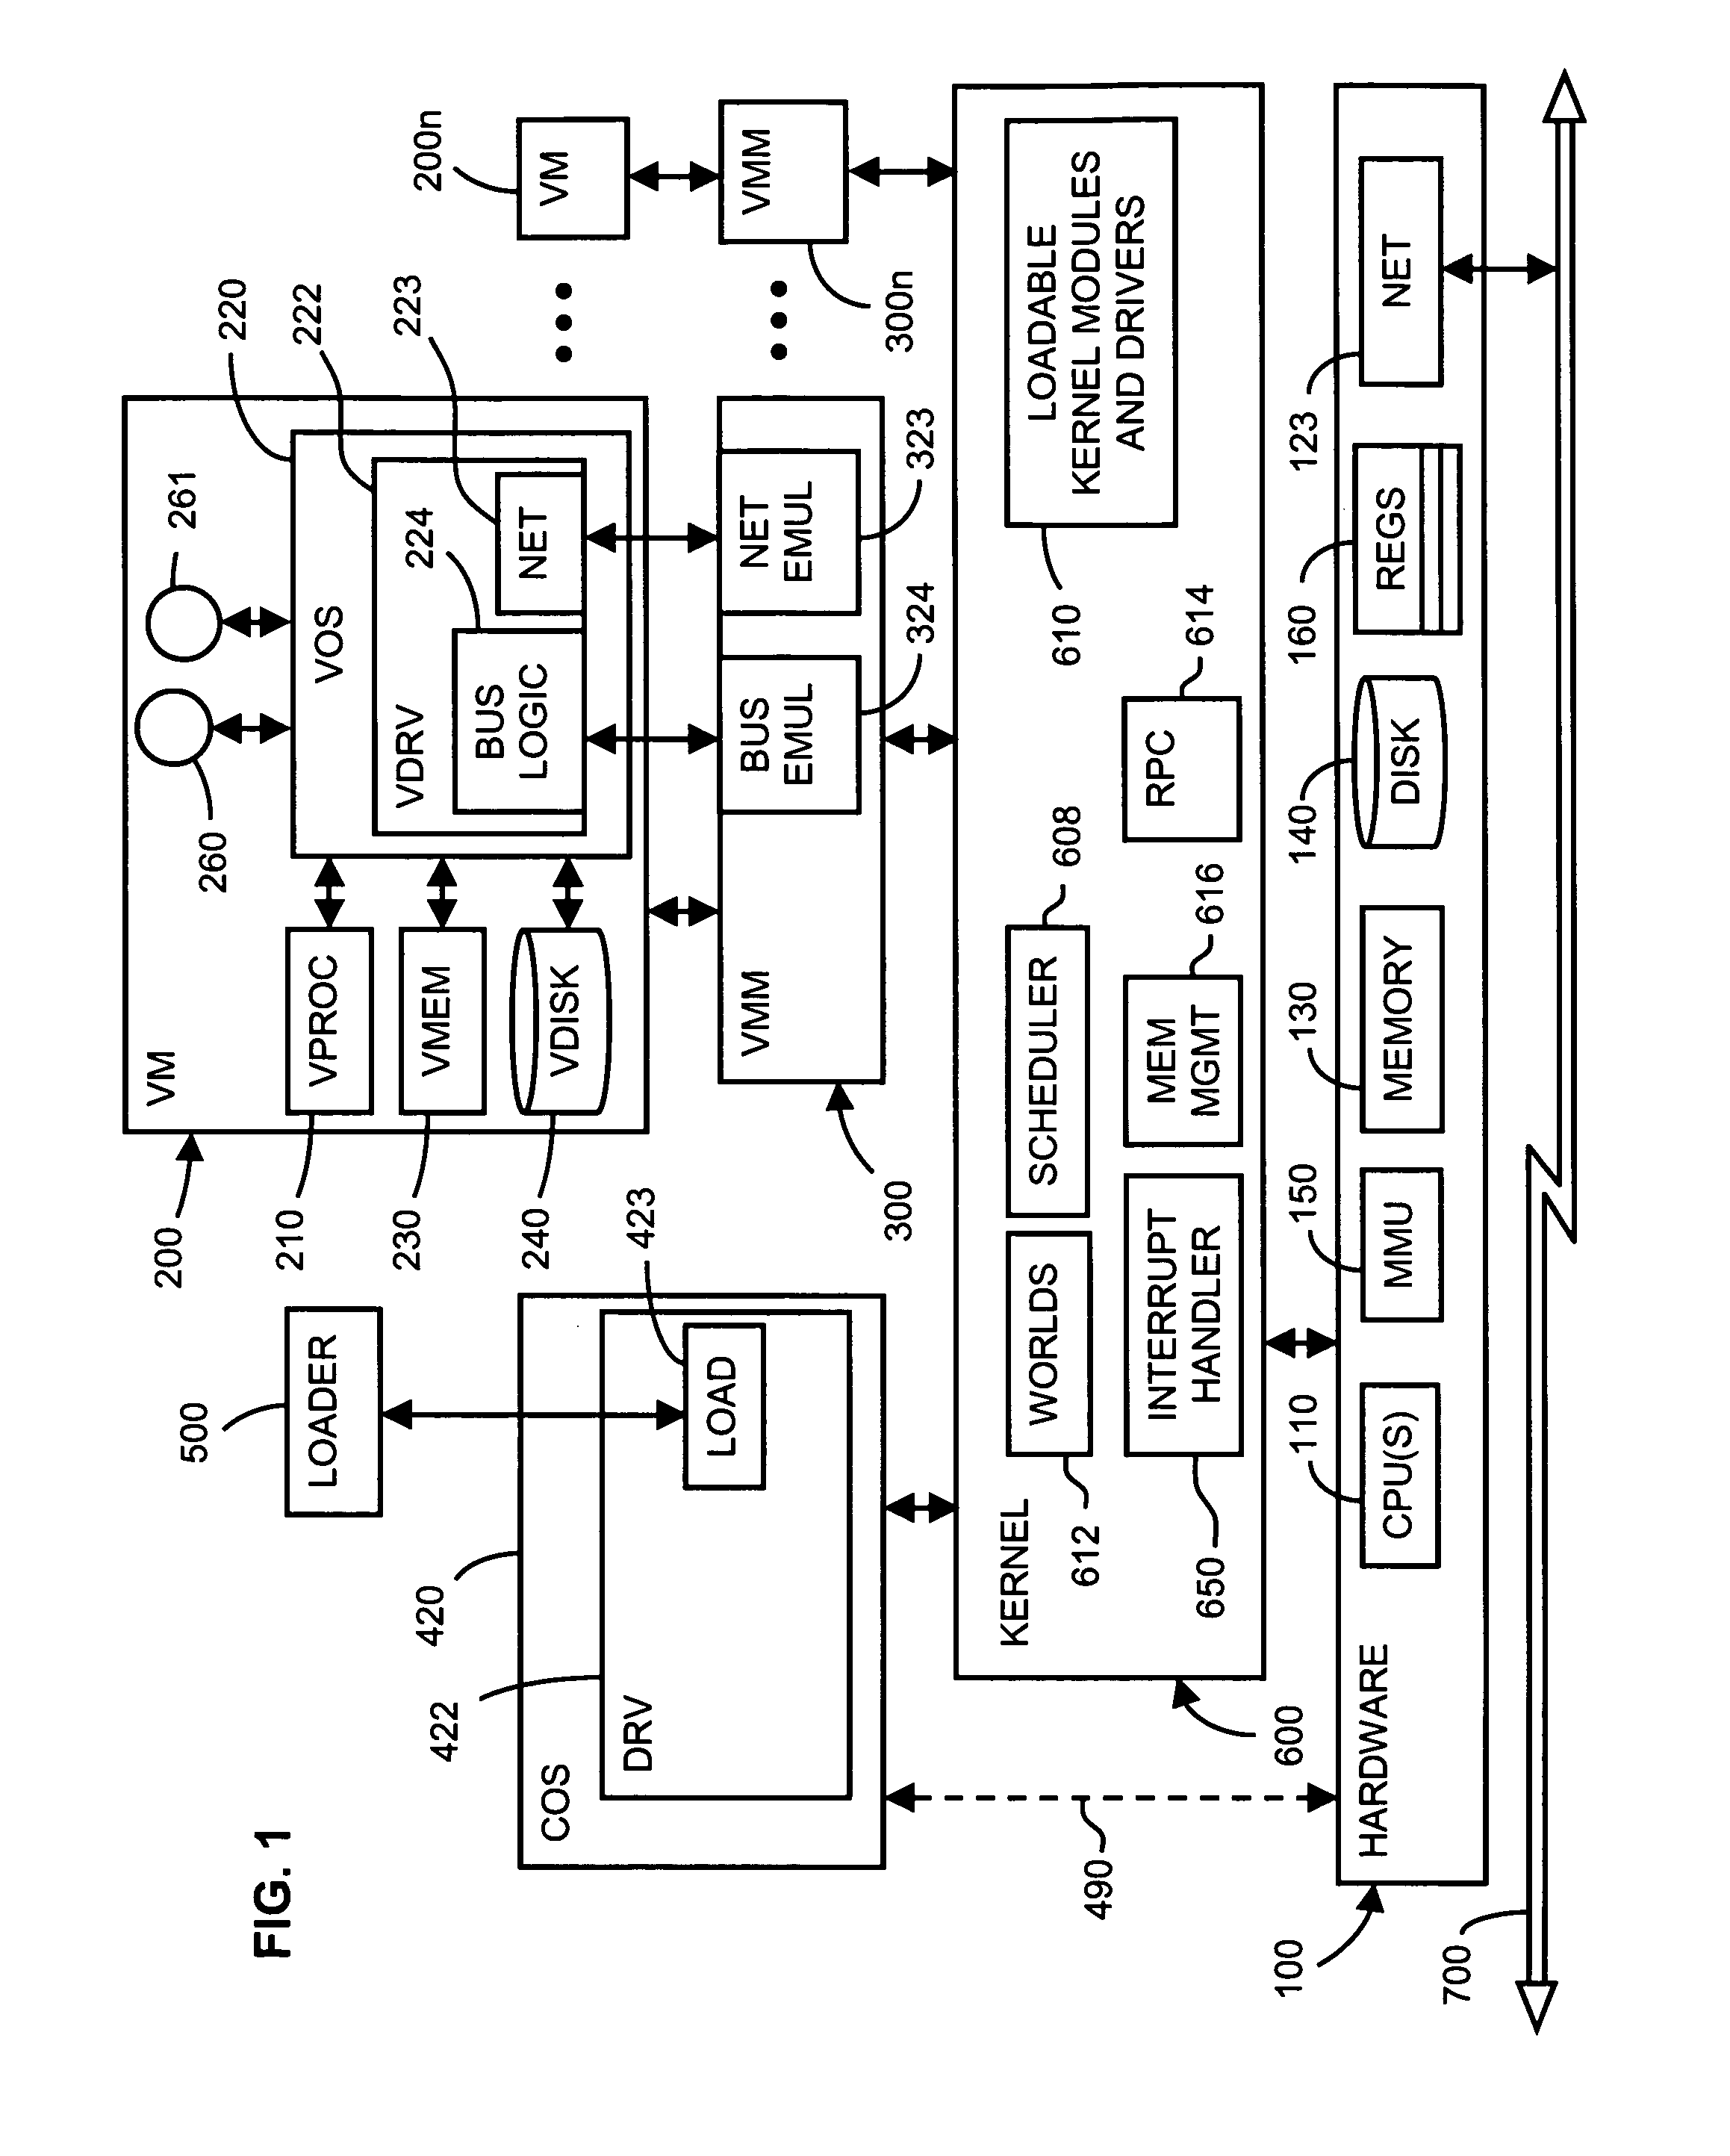 System software displacement in a virtual computer system